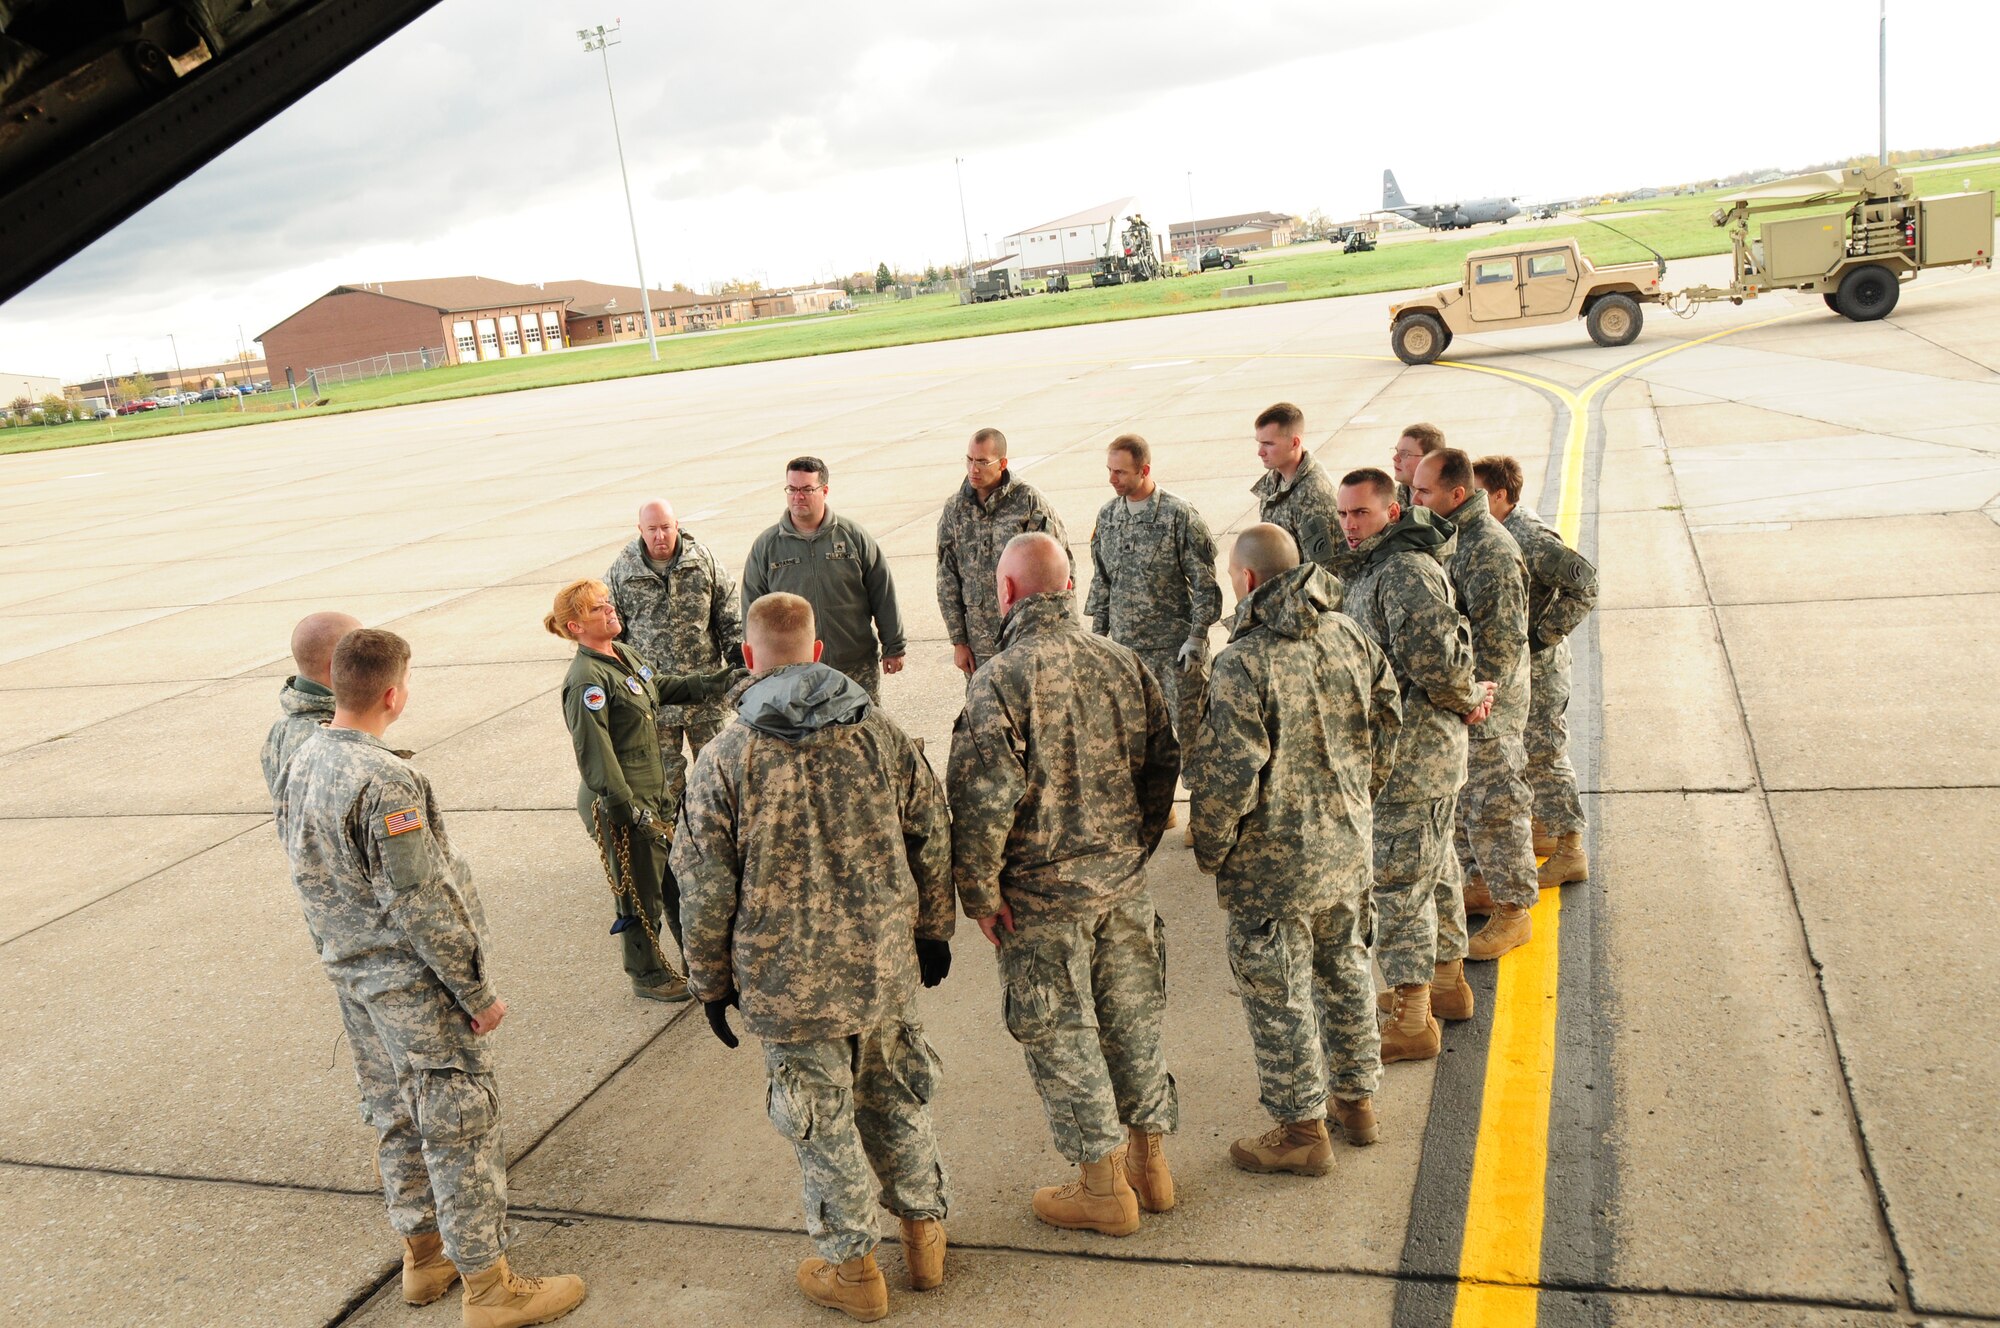 The operational company of the 42nd Infantry Division of the Army National Guard arrived ready to train with the 107th Airlift Wing's C-130 loadmasters. Senior Master Sgt. Santoro explains how the equipment will be loaded and secured on the C-130 aircraft. Oct. 20, 2012 (U.S. Air Force Photo/Senior Master Sgt. Ray Lloyd)
